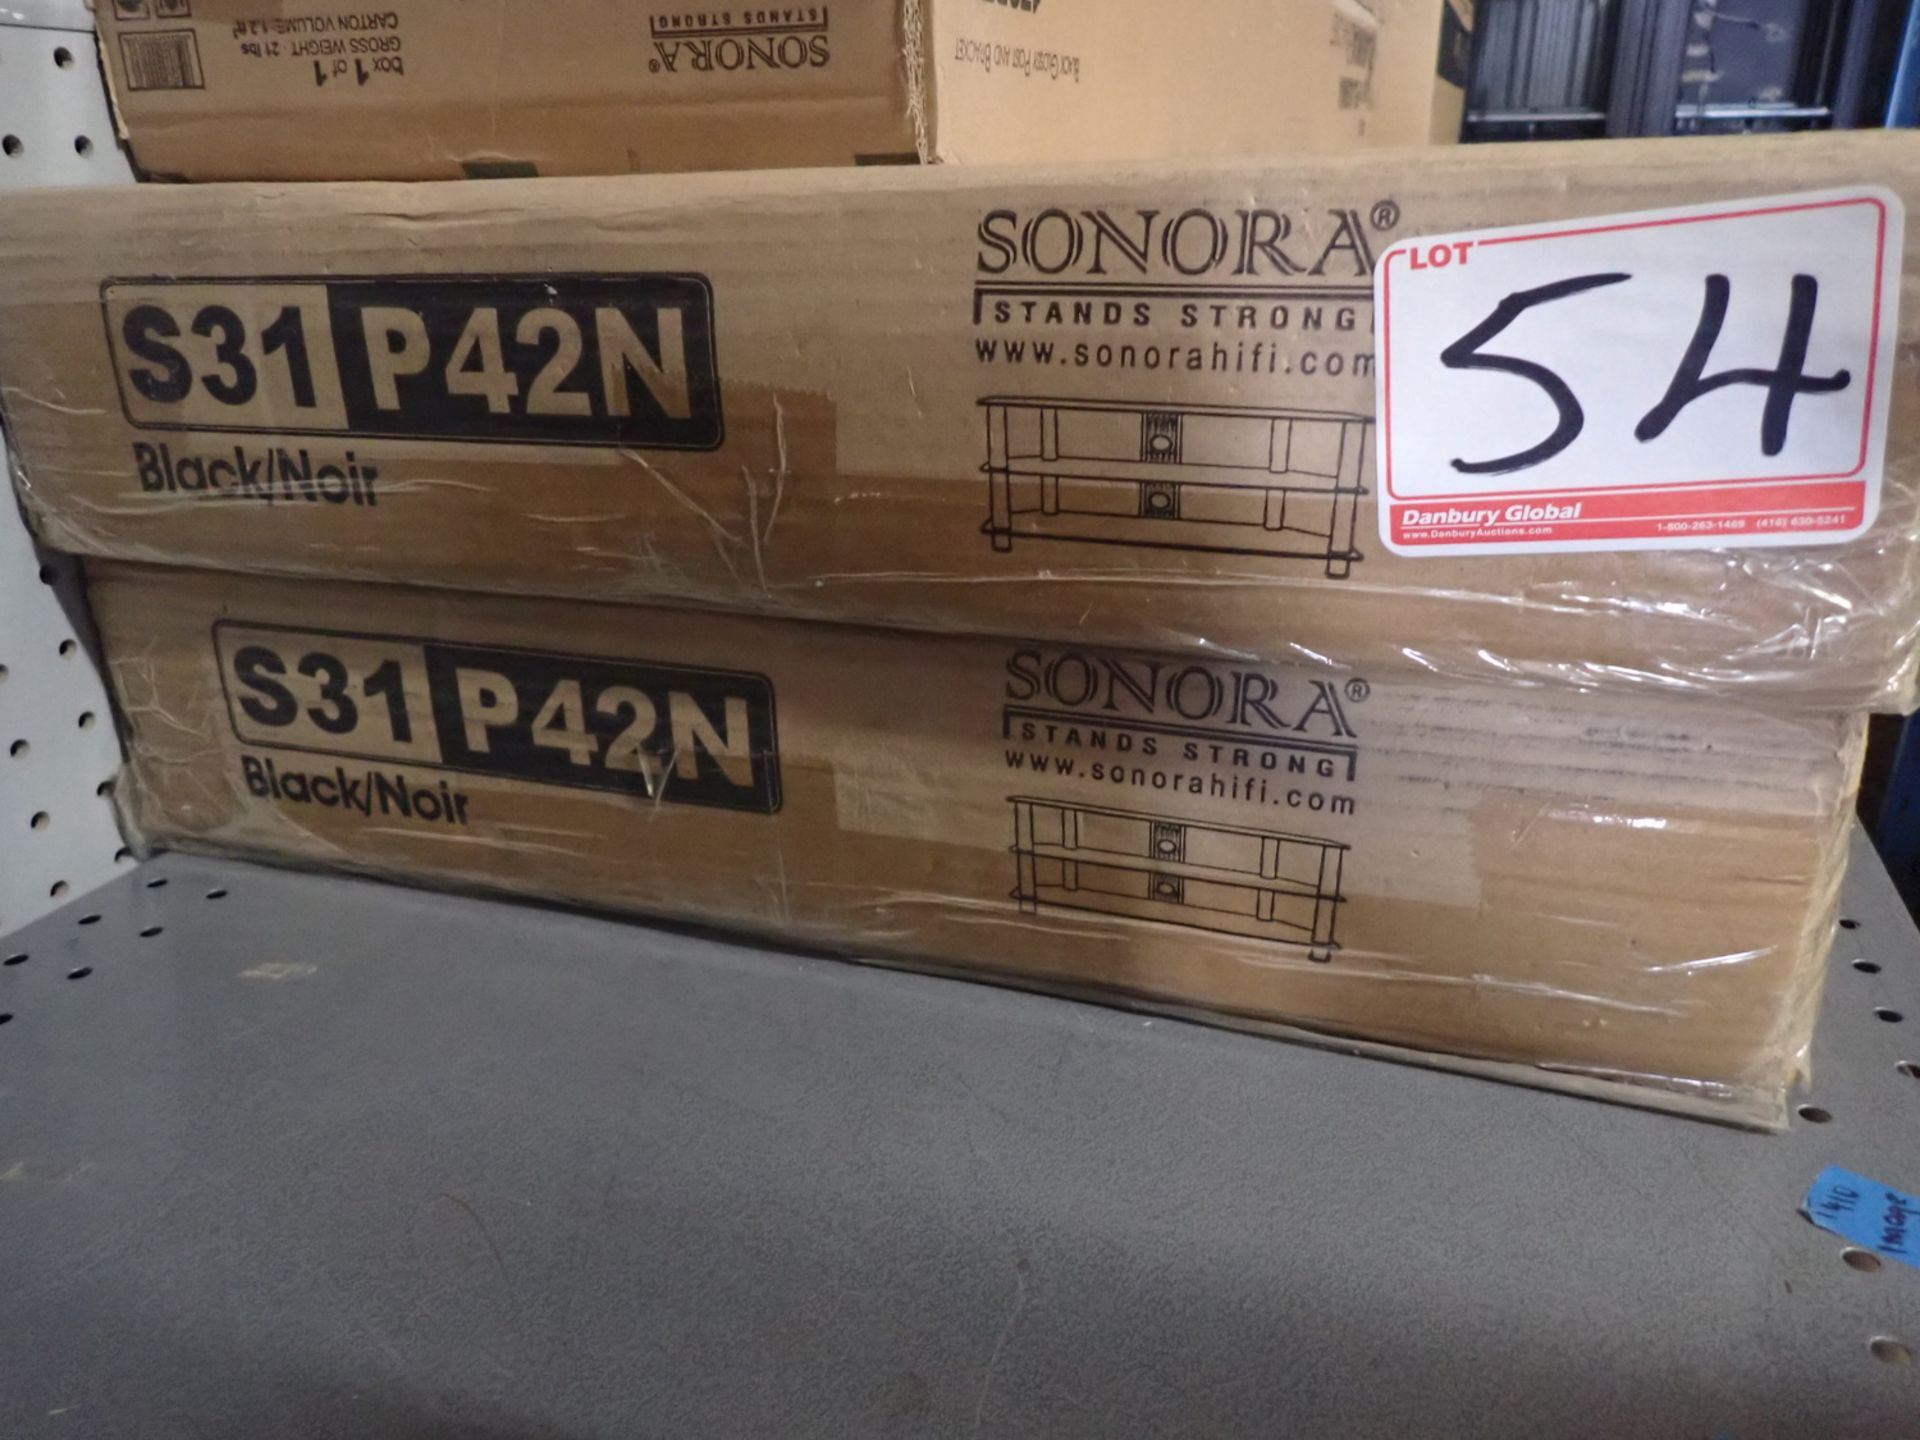 LOT - SONORA P42N BLACK TV STANDS (2 UNITS) - Image 2 of 2